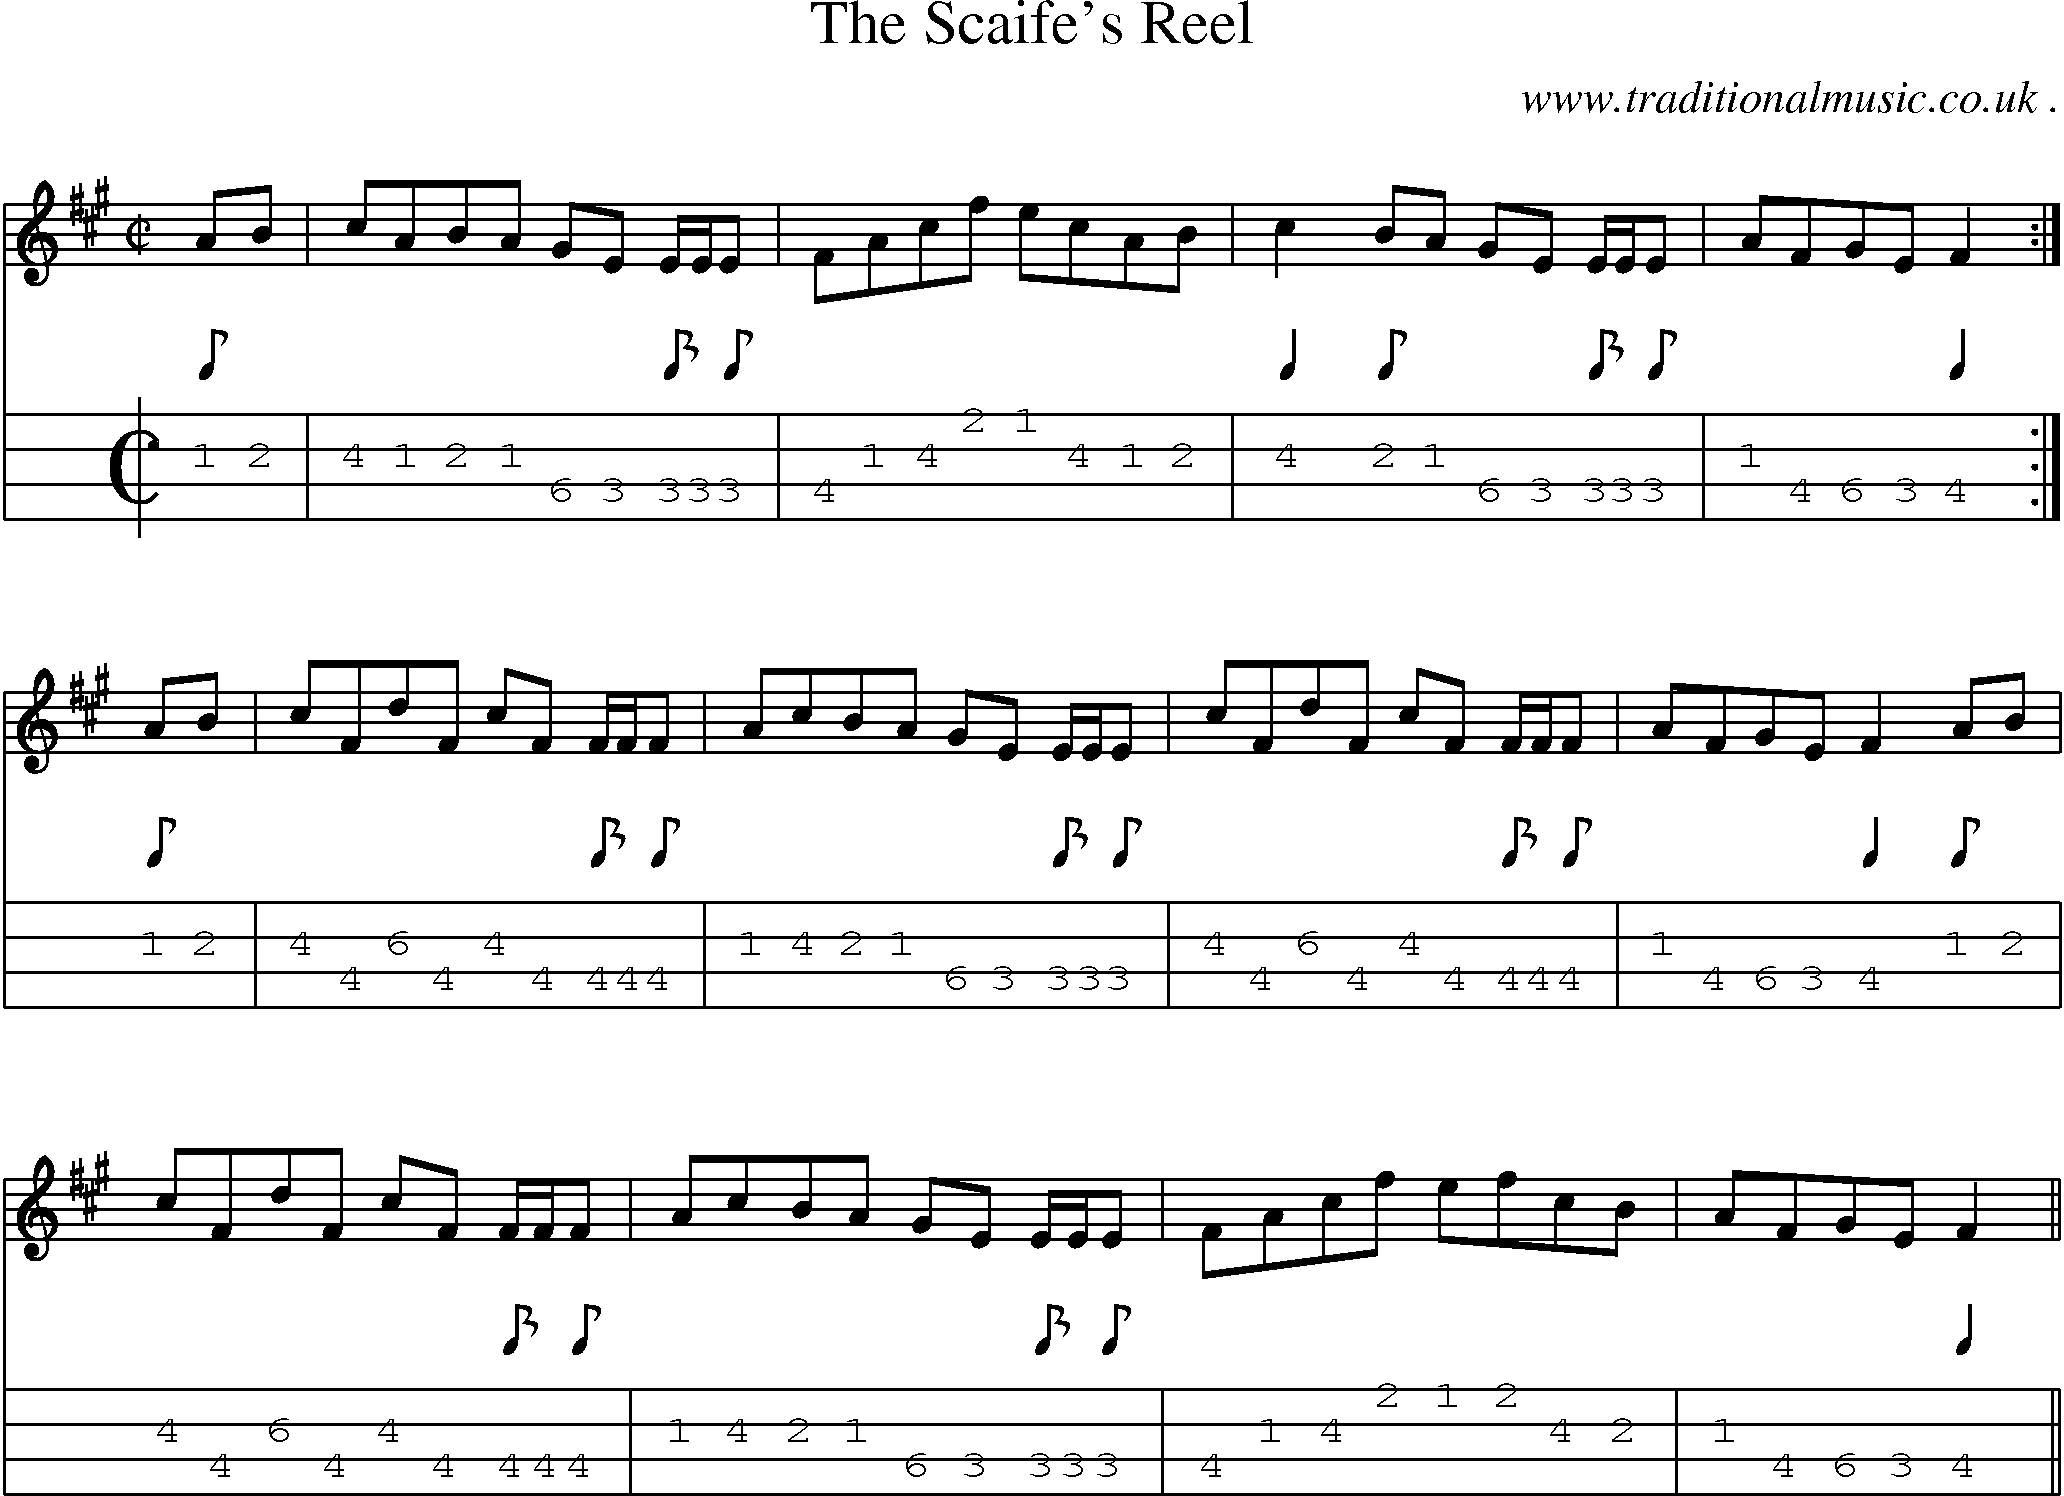 Sheet-Music and Mandolin Tabs for The Scaifes Reel